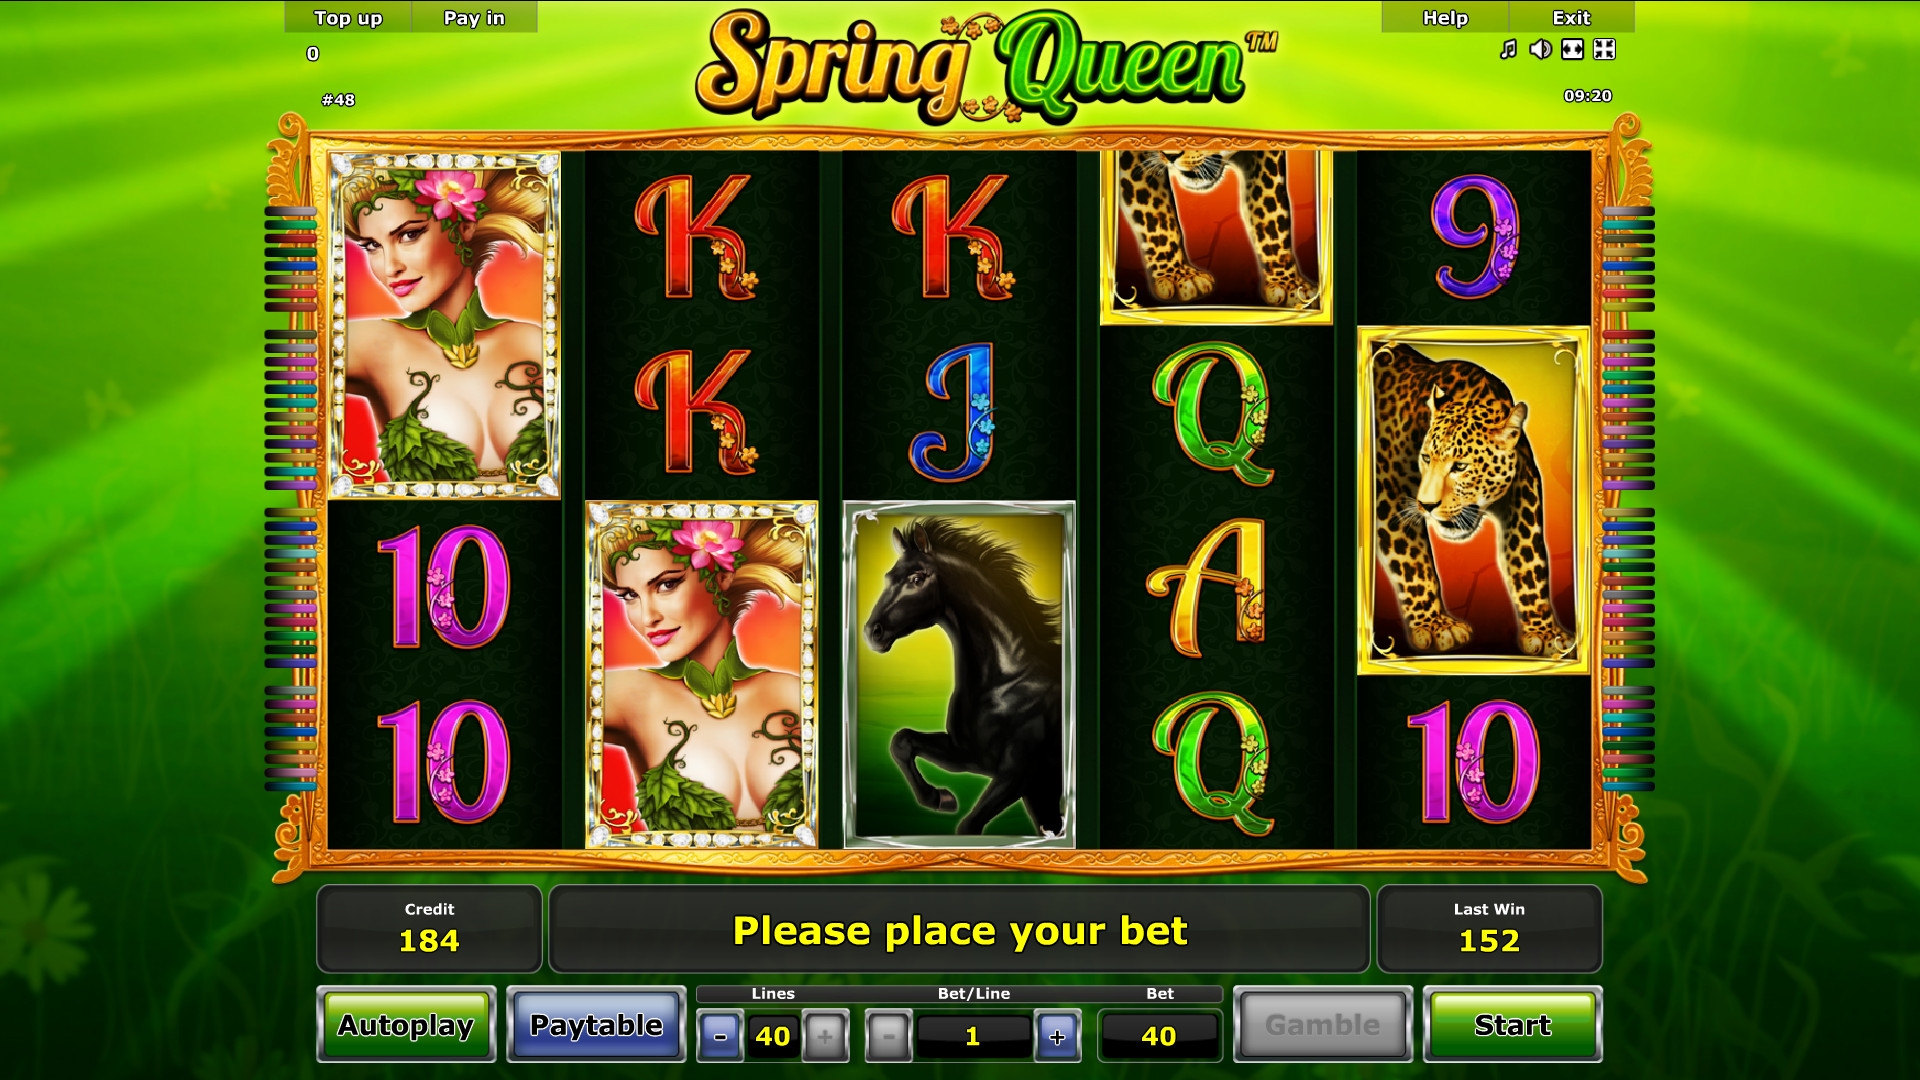 Spring Queen (Spring Queen) from category Slots